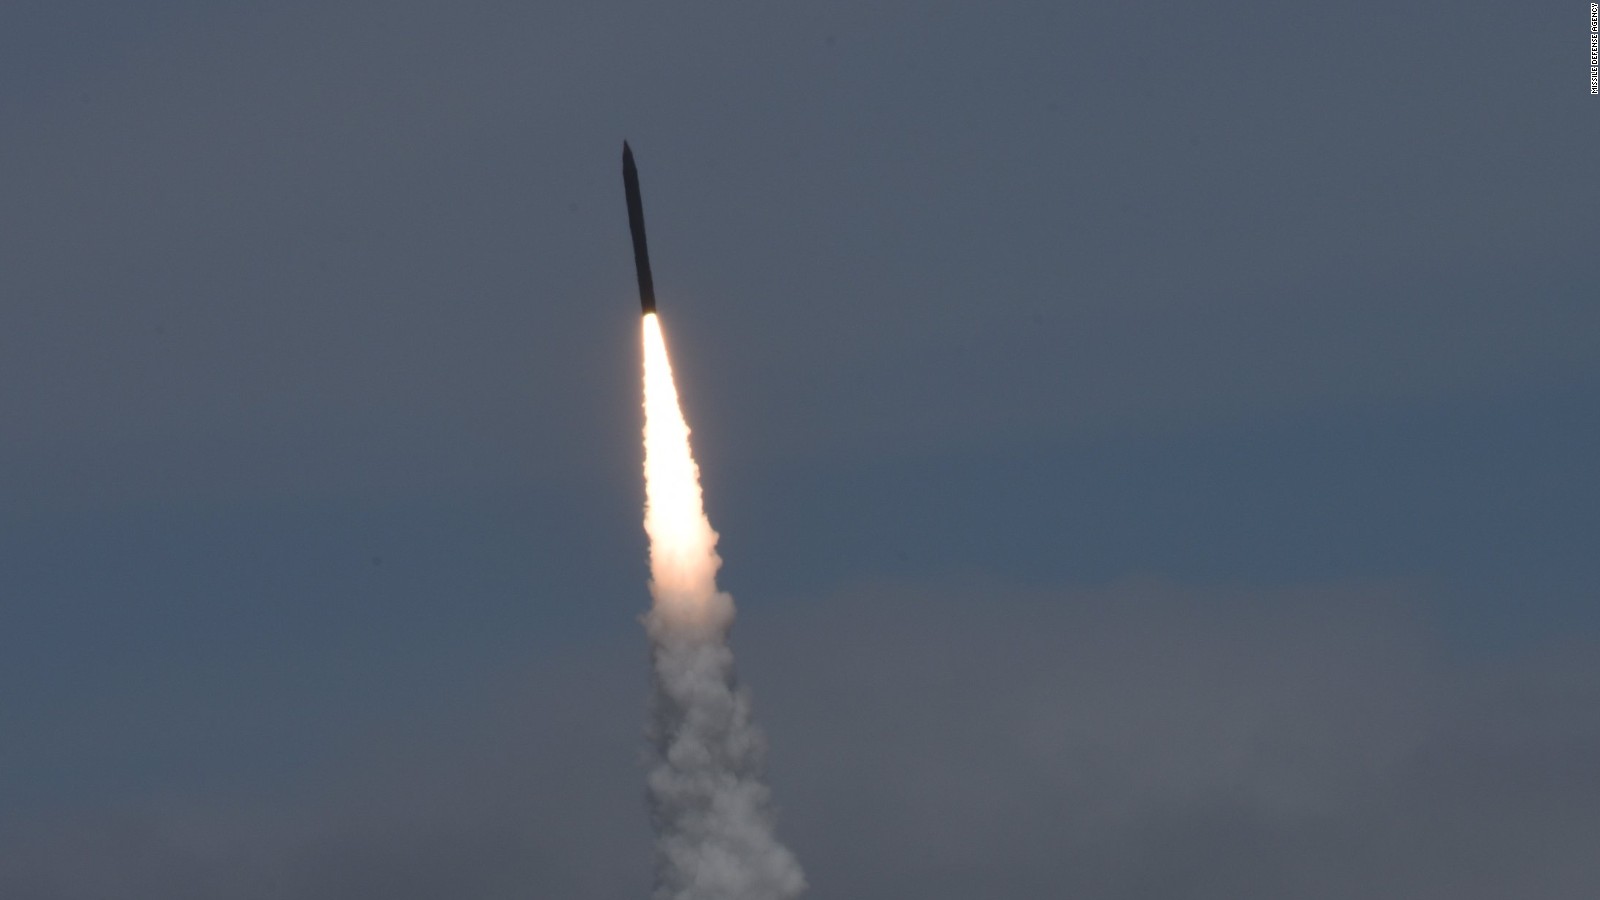 A balistic missile in the air